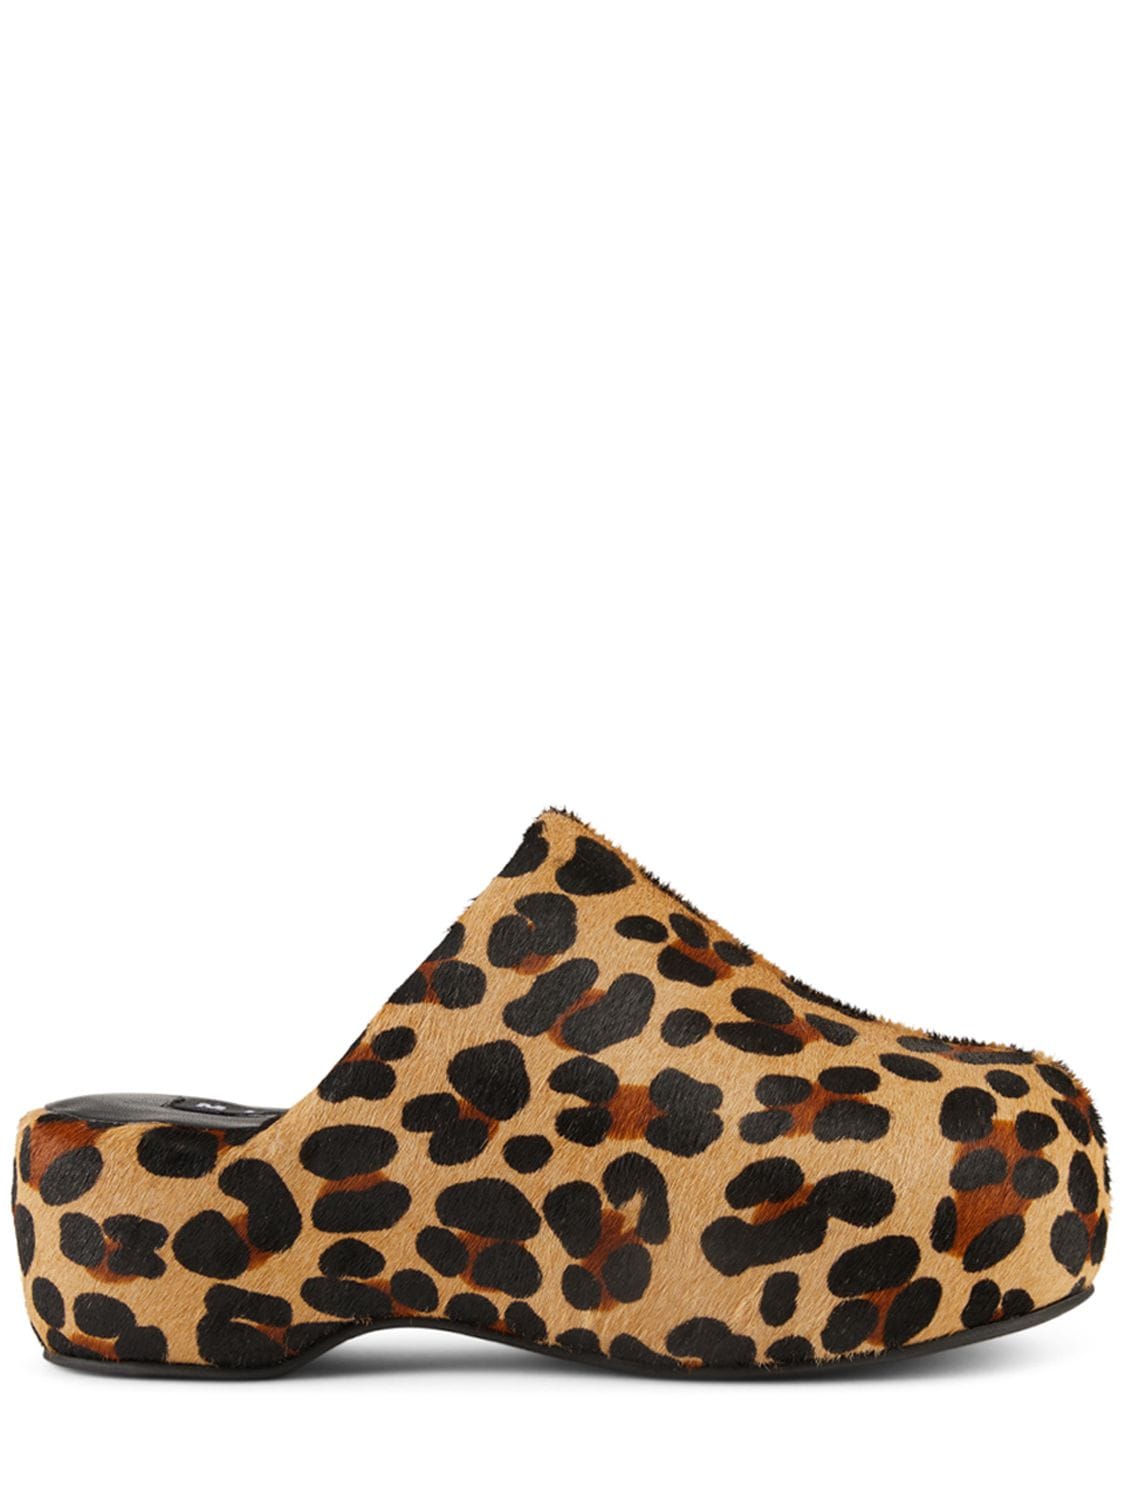 Simon Miller 55mm Bubble Leather Clogs In Cheetah